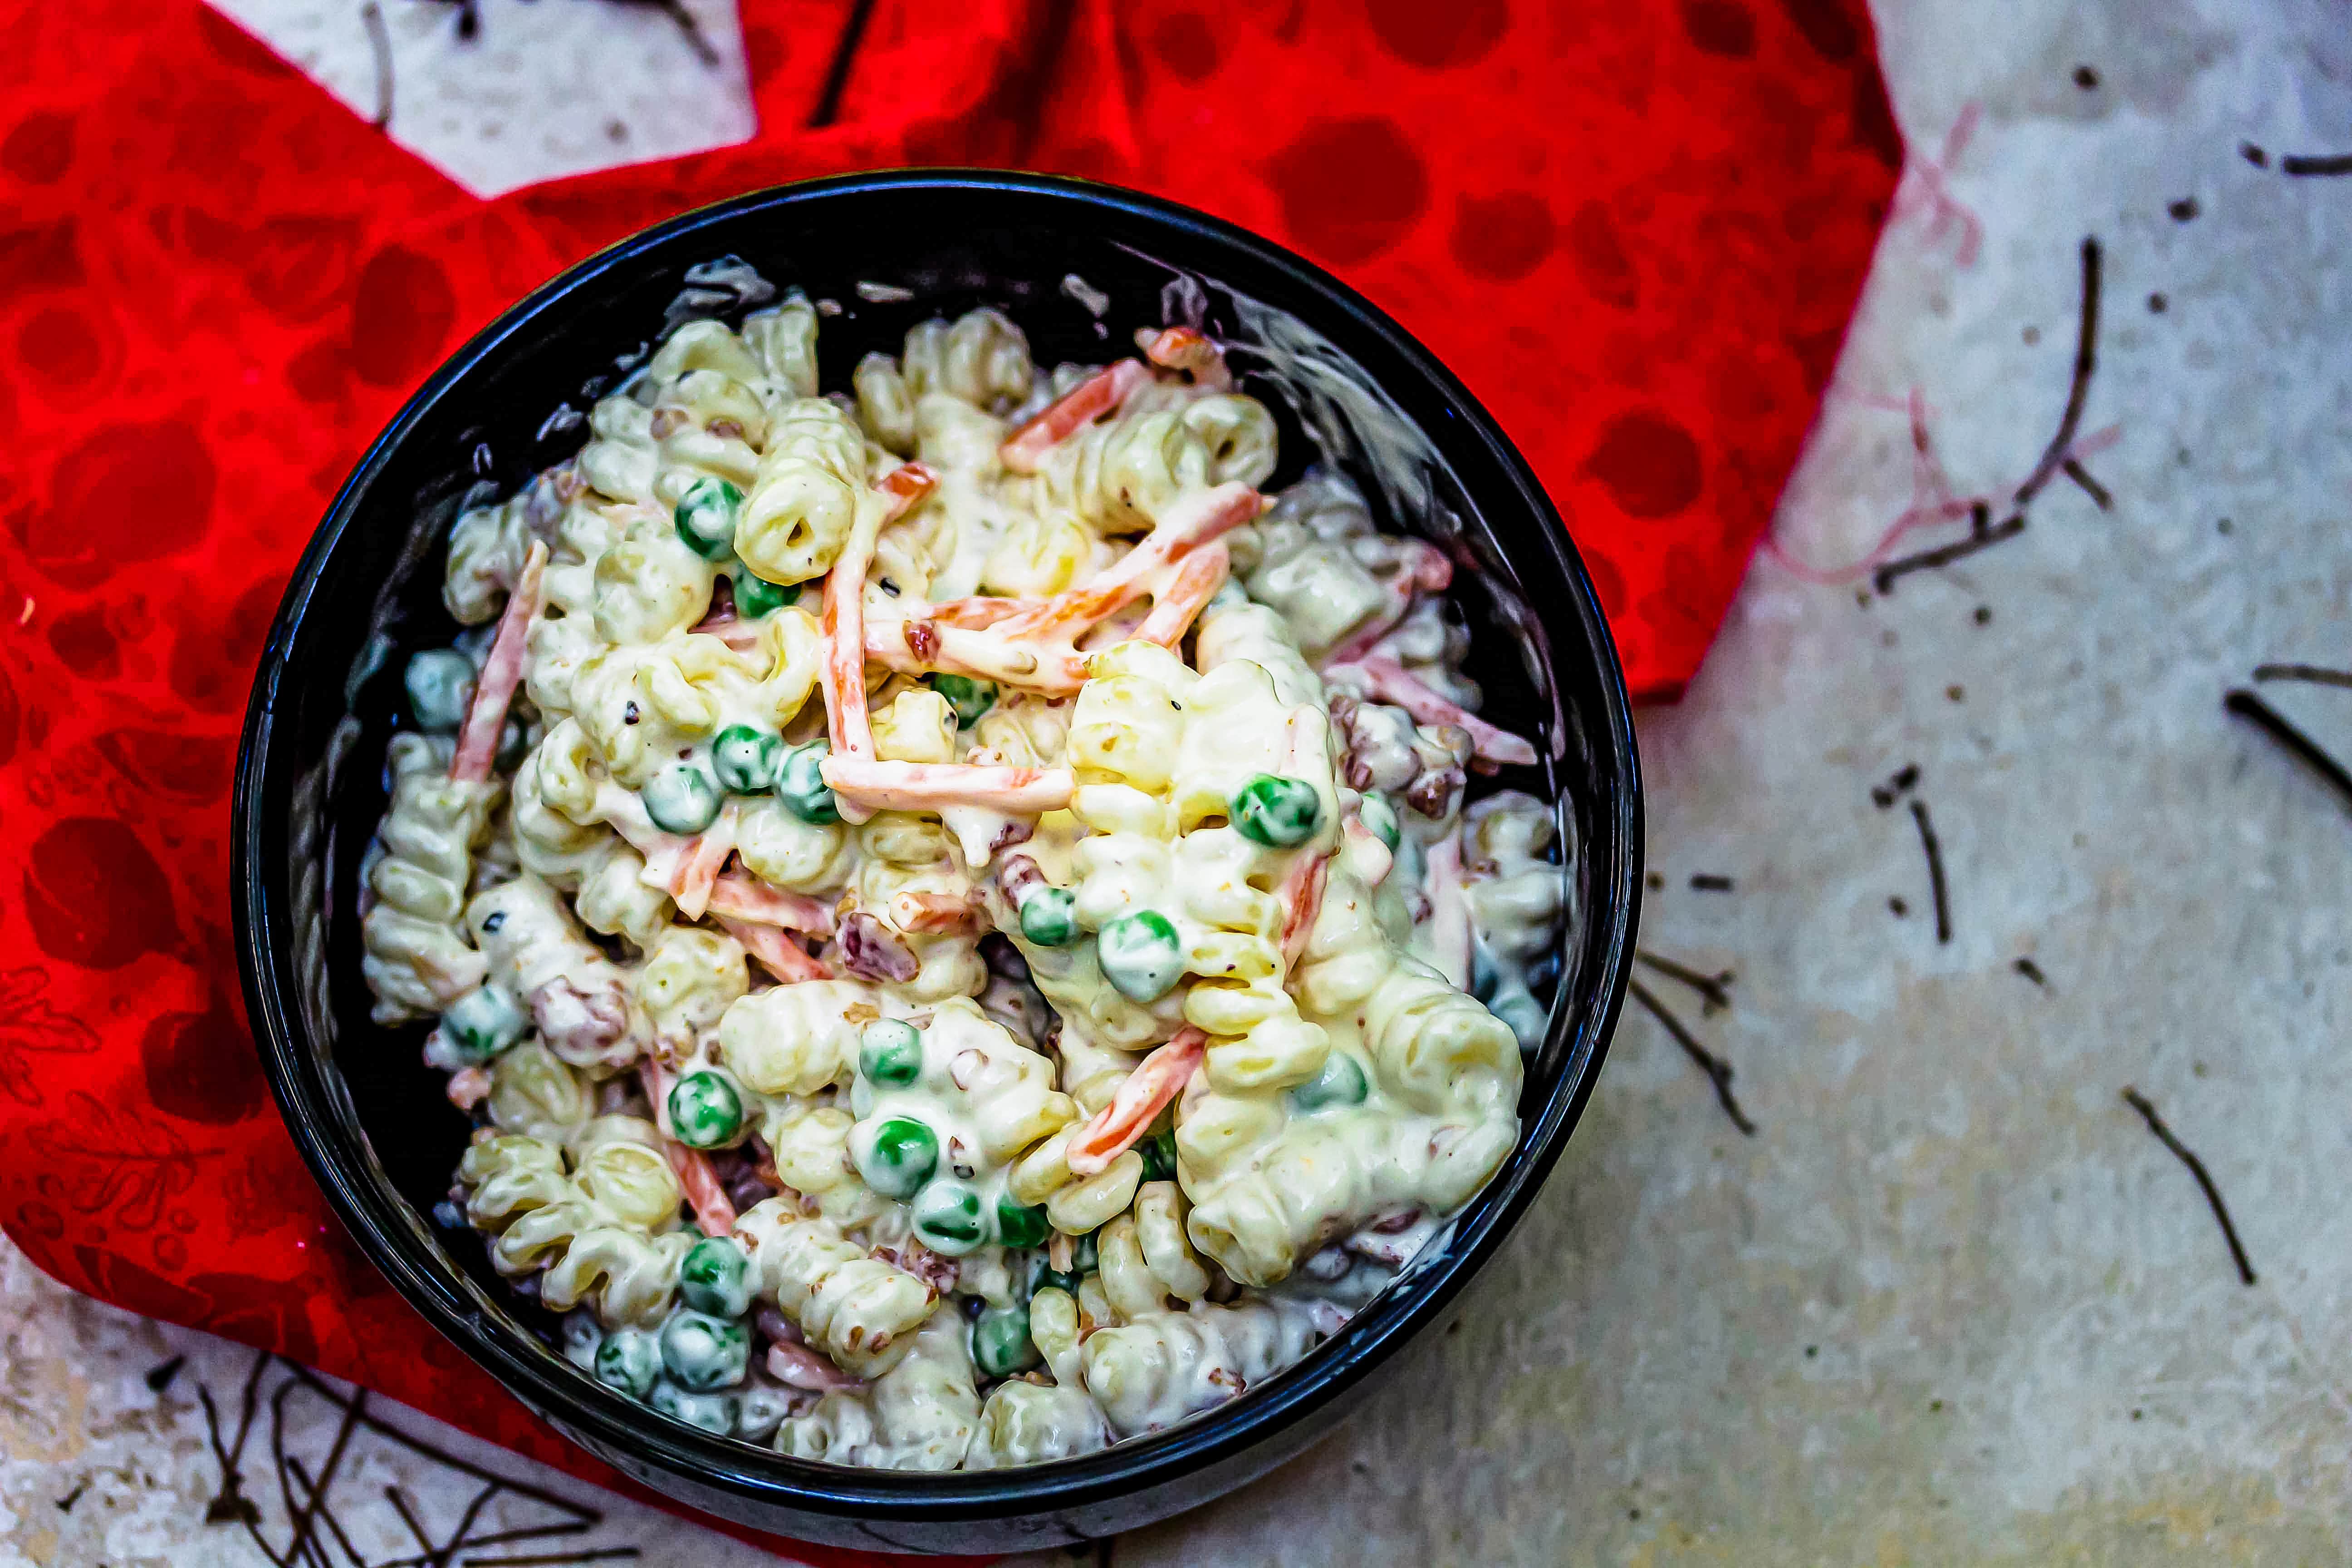 bacon ranch pasta salad in black bowl on red c;loth on grey stone